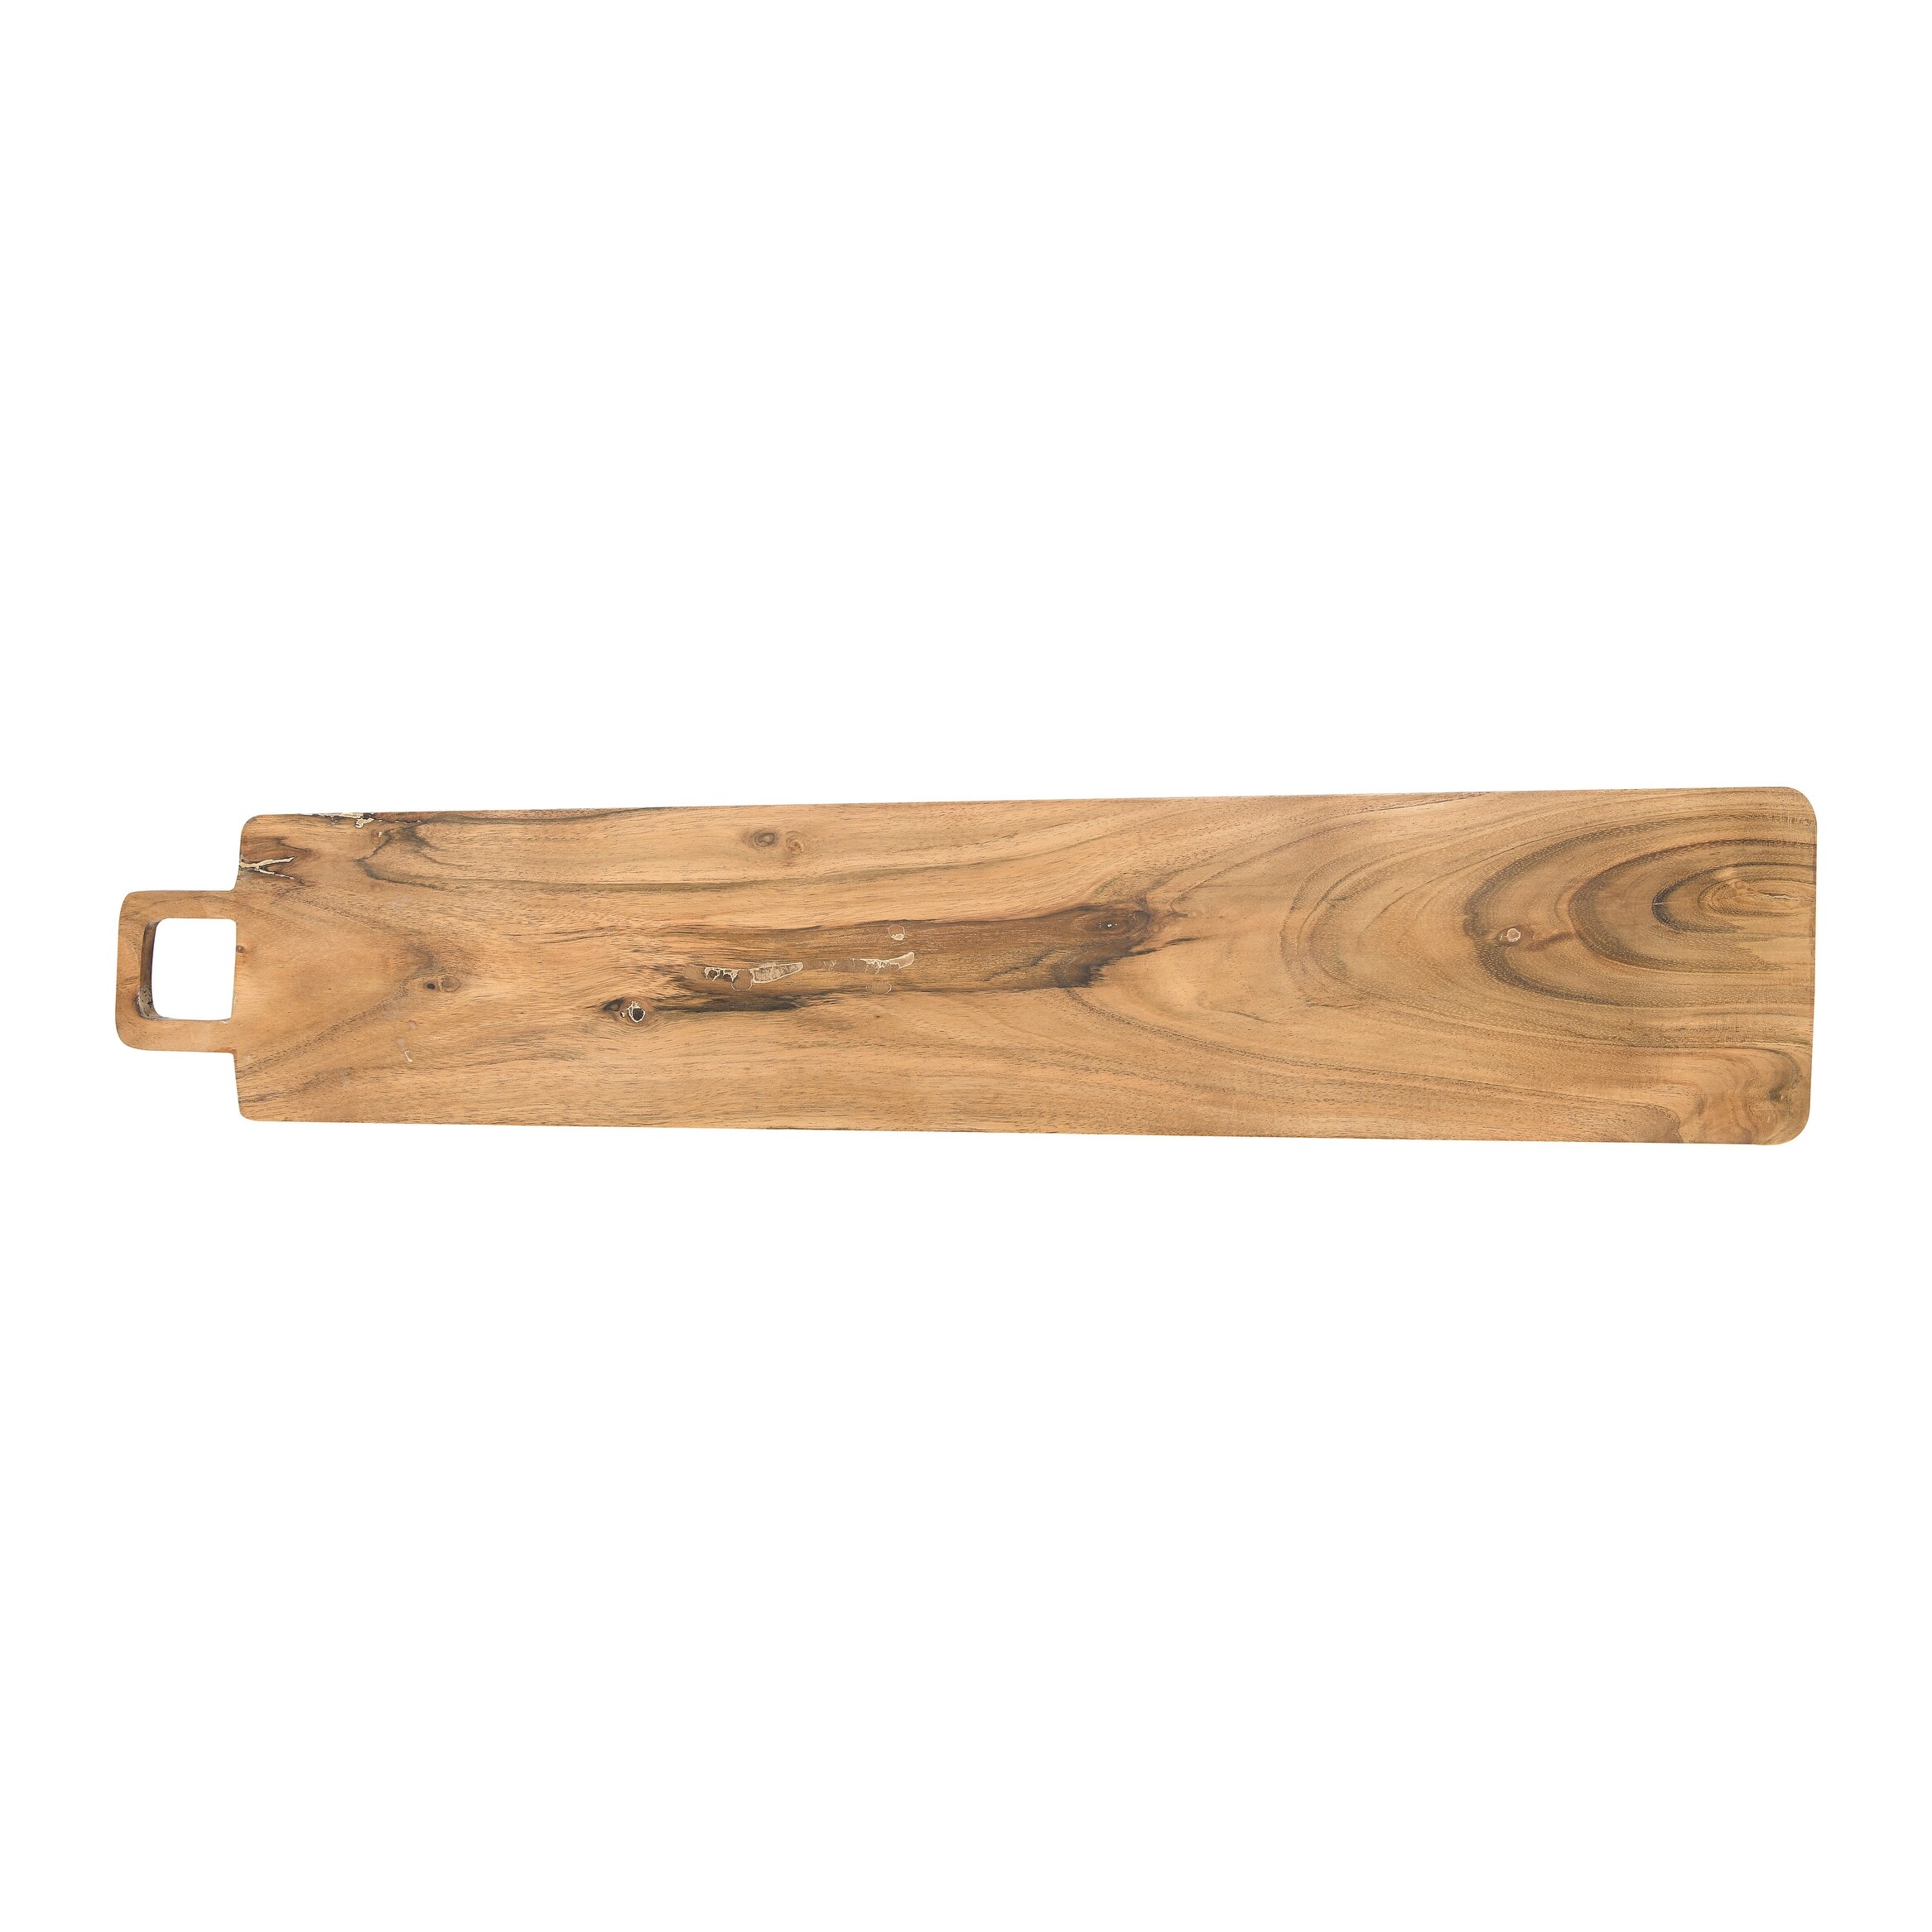 https://ak1.ostkcdn.com/images/products/is/images/direct/d77ff246526a66a841617d96a05aaf922fc6fc19/Acacia-Wood-Cheese-Cutting-Board-with-Handle.jpg